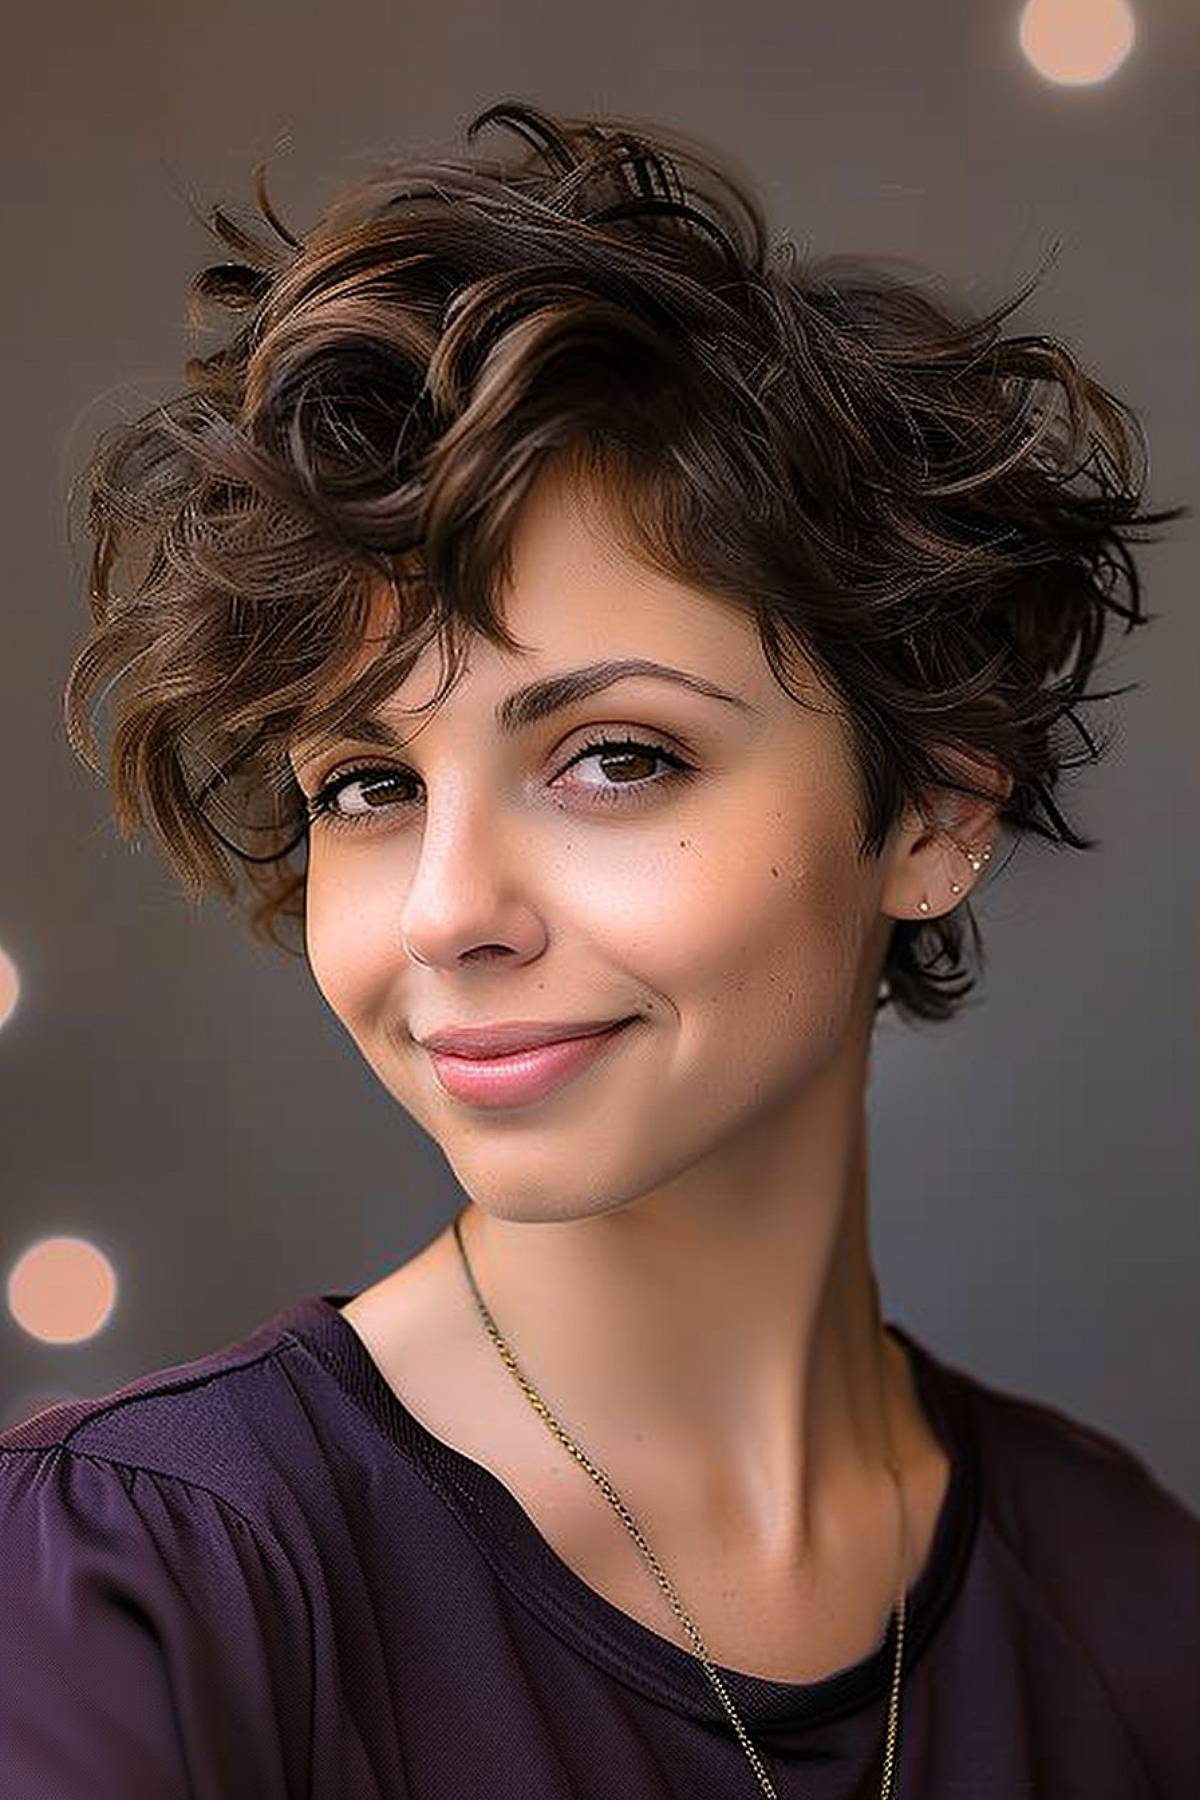 The fun-loving woman showed off a bright and cheerful hairstyle with a pixie cut with angled bangs and a natural curled finish.